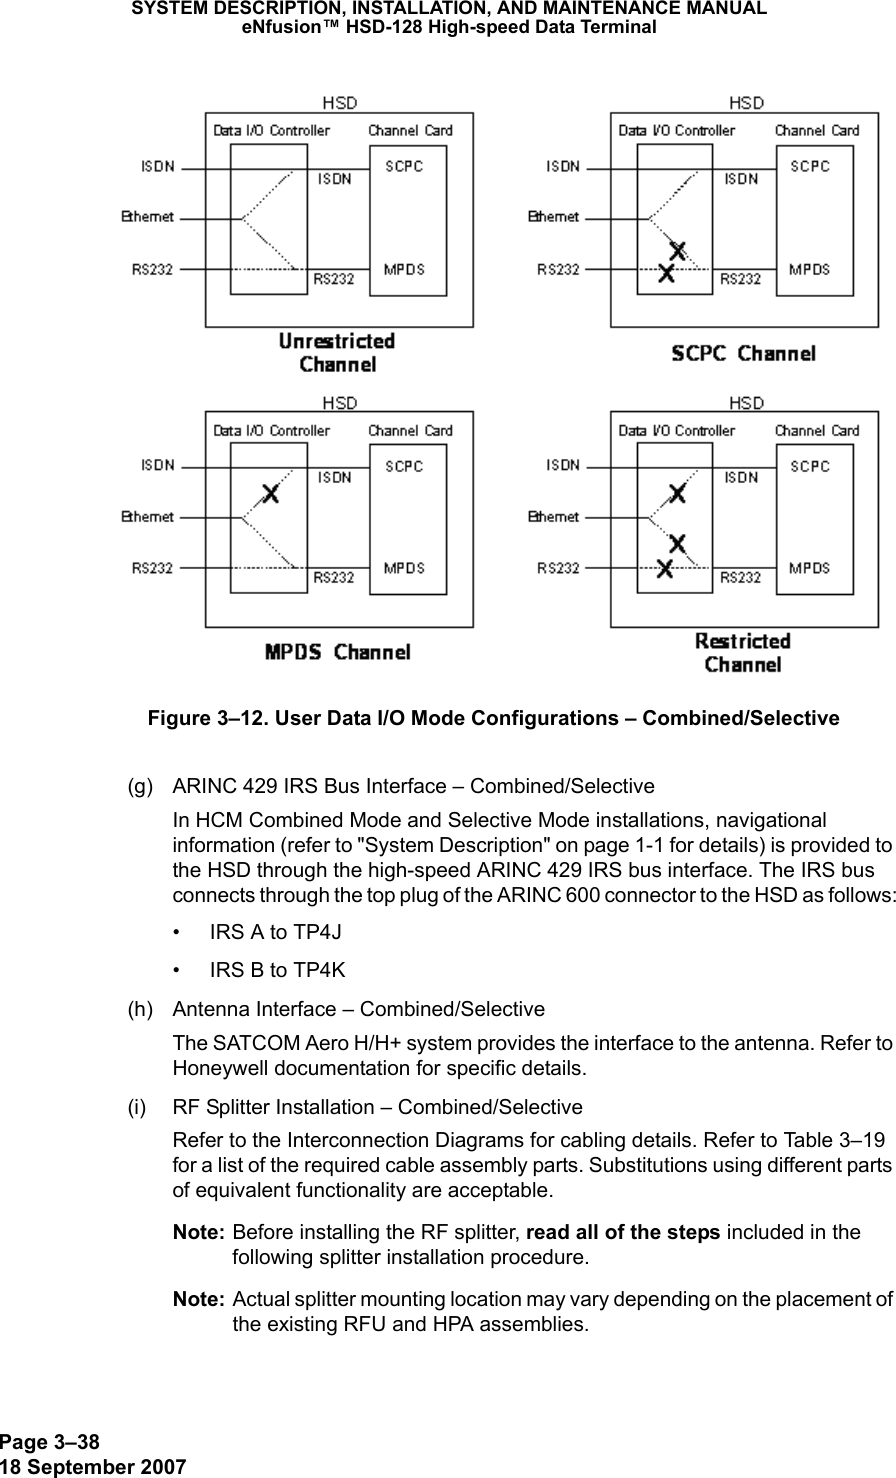 Page 3–3818 September 2007SYSTEM DESCRIPTION, INSTALLATION, AND MAINTENANCE MANUALeNfusion™ HSD-128 High-speed Data TerminalFigure 3–12. User Data I/O Mode Configurations – Combined/Selective(g) ARINC 429 IRS Bus Interface – Combined/SelectiveIn HCM Combined Mode and Selective Mode installations, navigational information (refer to &quot;System Description&quot; on page 1-1 for details) is provided to the HSD through the high-speed ARINC 429 IRS bus interface. The IRS bus connects through the top plug of the ARINC 600 connector to the HSD as follows:• IRS A to TP4J• IRS B to TP4K(h) Antenna Interface – Combined/SelectiveThe SATCOM Aero H/H+ system provides the interface to the antenna. Refer to Honeywell documentation for specific details. (i) RF Splitter Installation – Combined/SelectiveRefer to the Interconnection Diagrams for cabling details. Refer to Table 3–19 for a list of the required cable assembly parts. Substitutions using different parts of equivalent functionality are acceptable.Note: Before installing the RF splitter, read all of the steps included in the following splitter installation procedure.Note: Actual splitter mounting location may vary depending on the placement of the existing RFU and HPA assemblies.